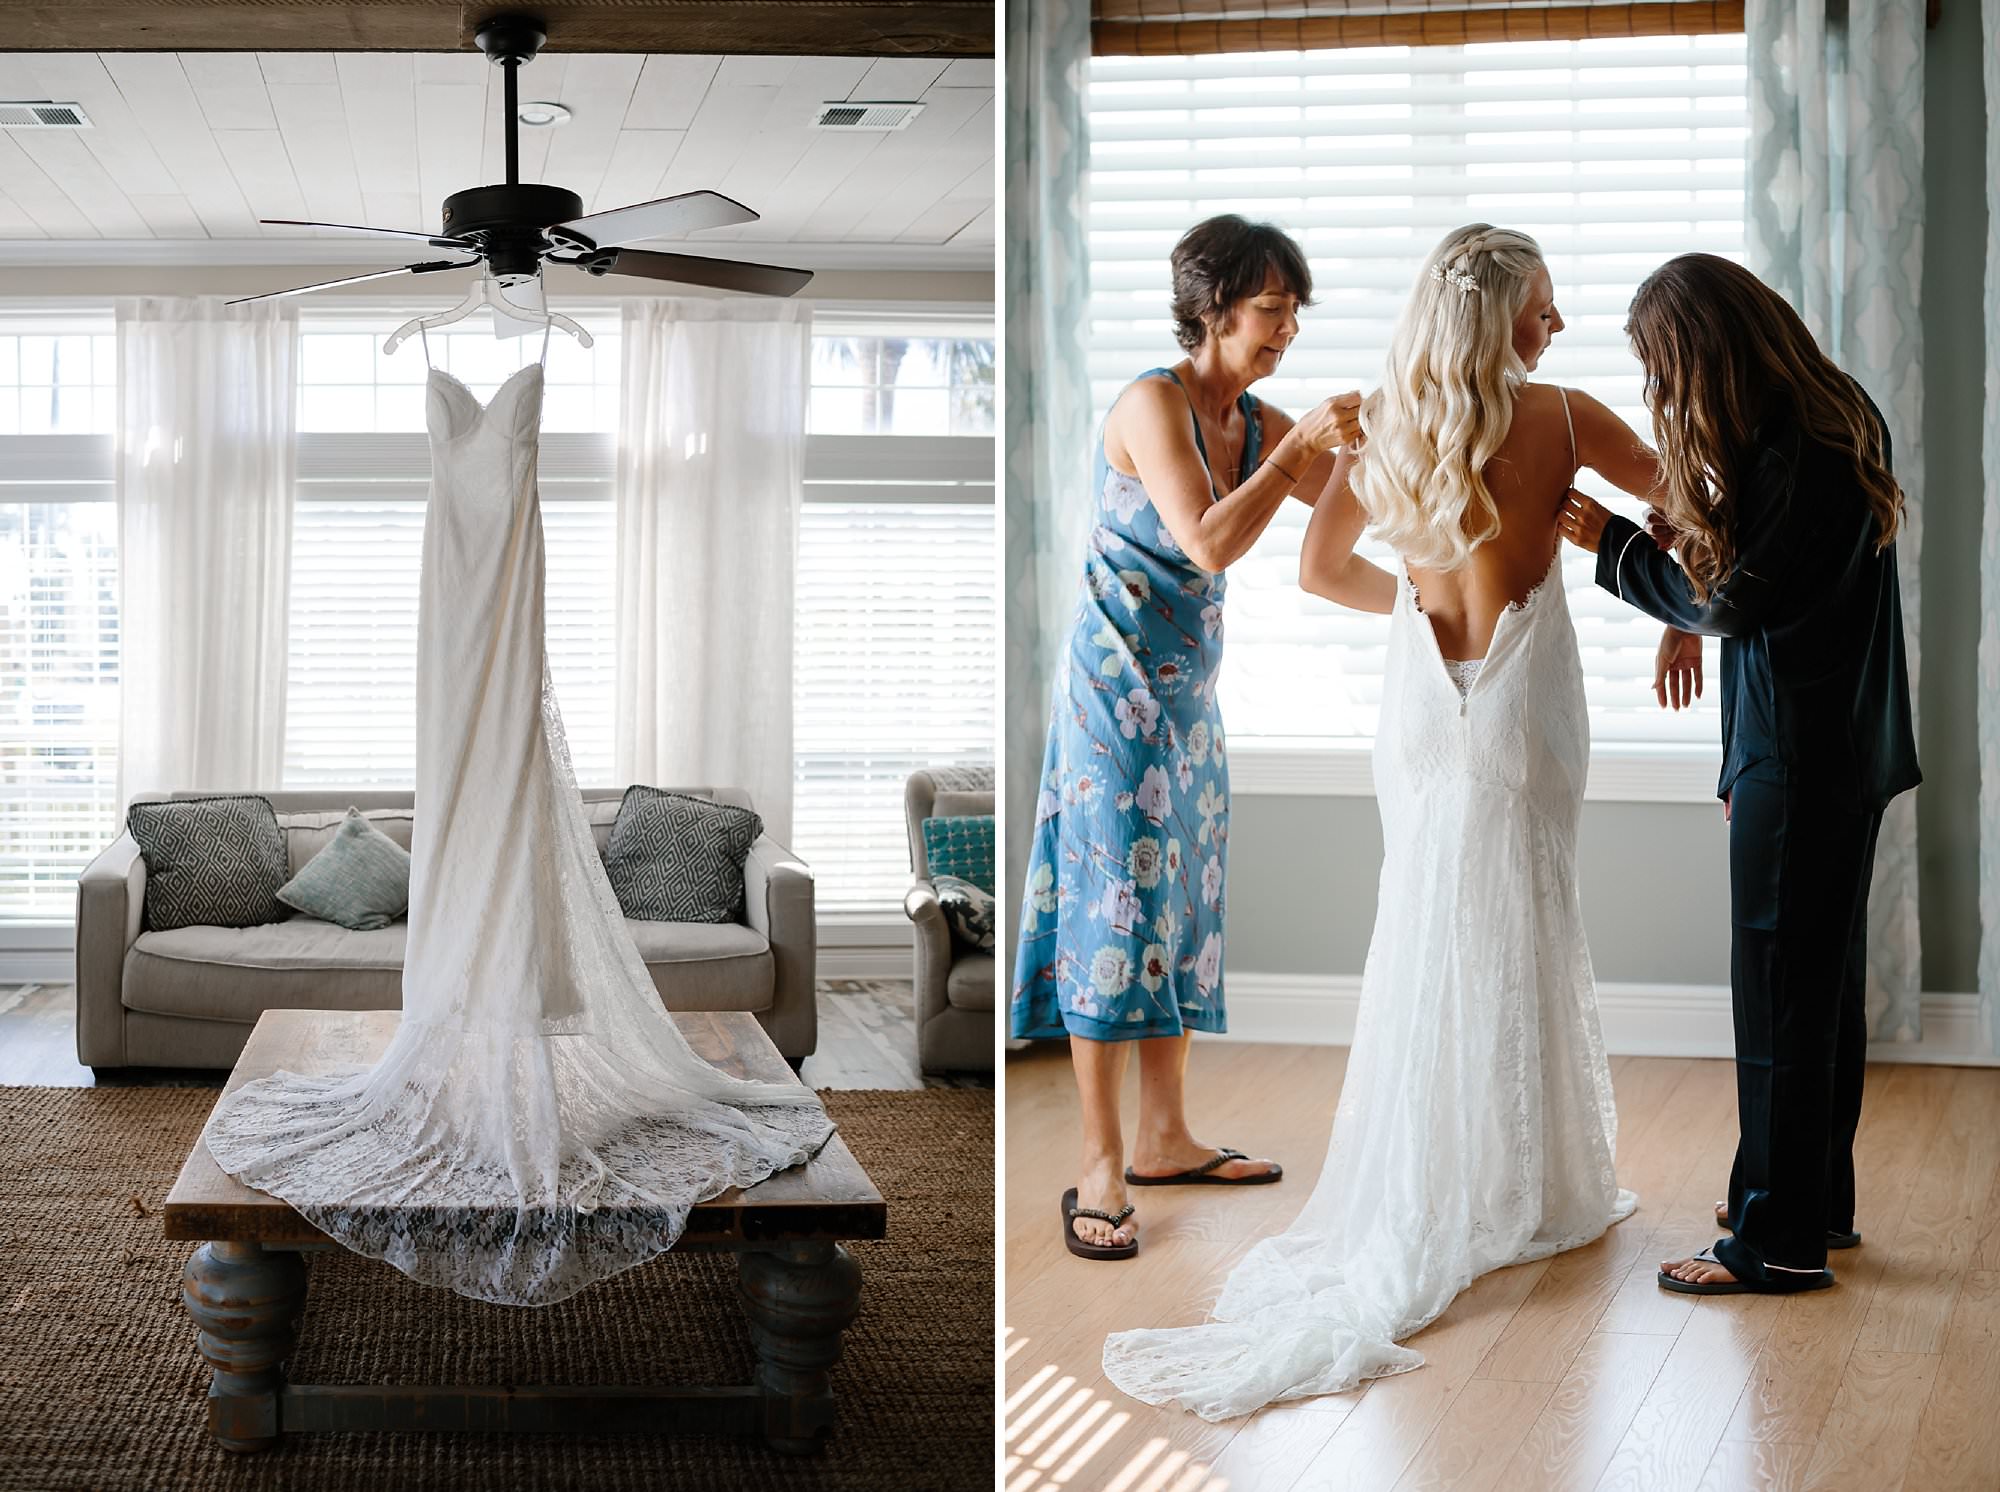 Mother and sister helping bride into white lace sheath wedding dress